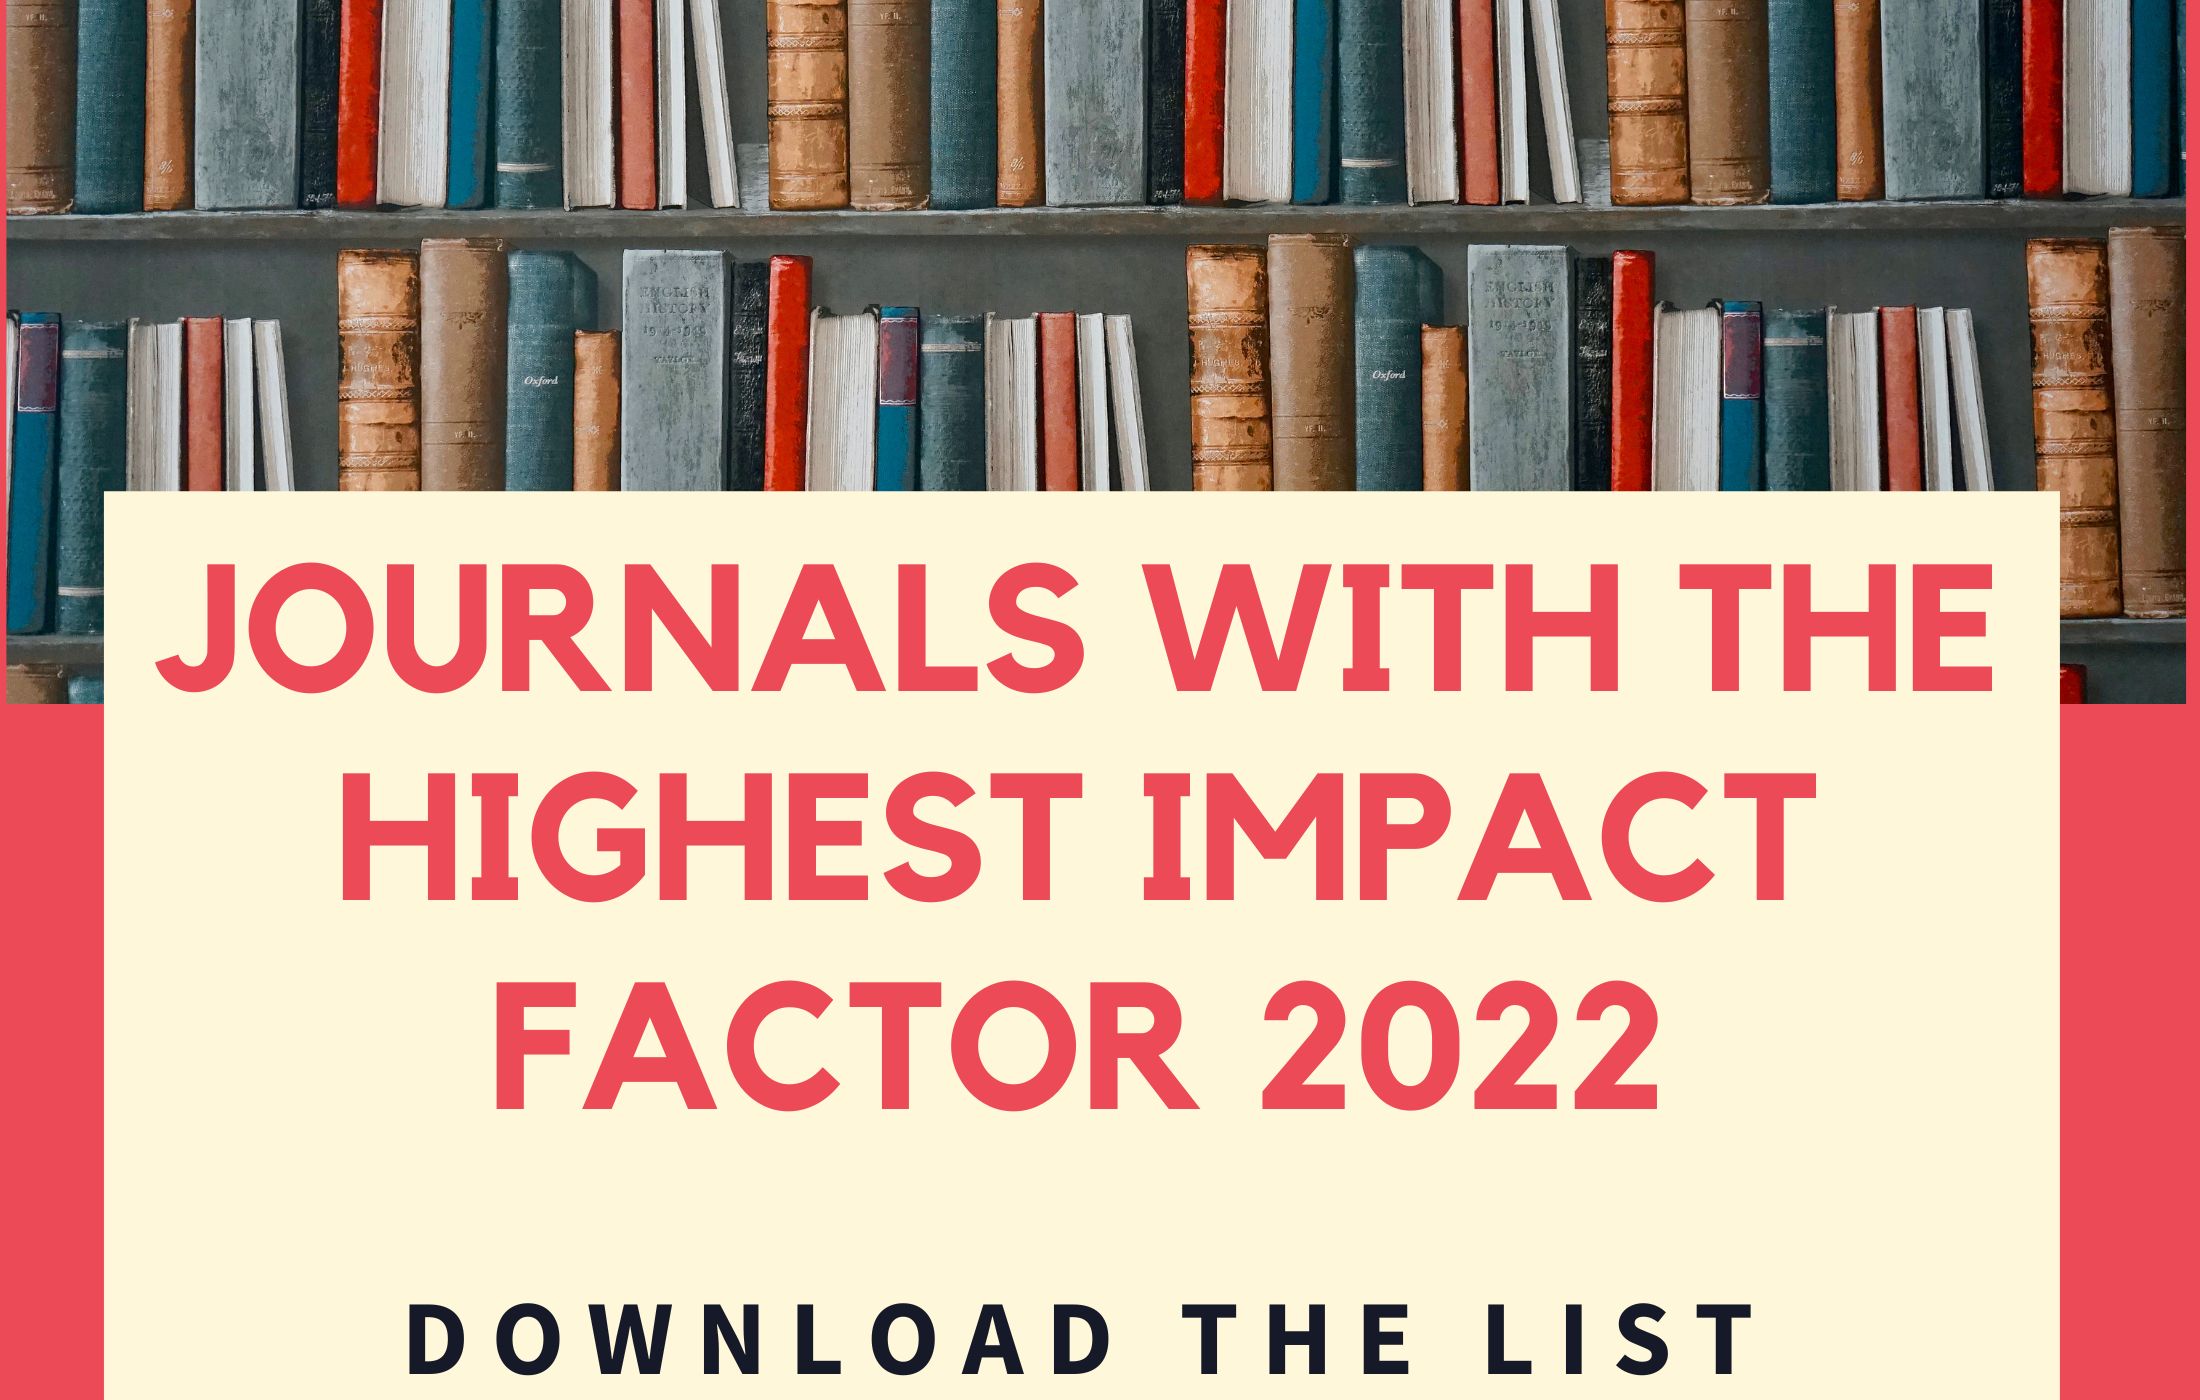 Top 100 Journals With Impact Factor in 2022 (Highest To Lowest